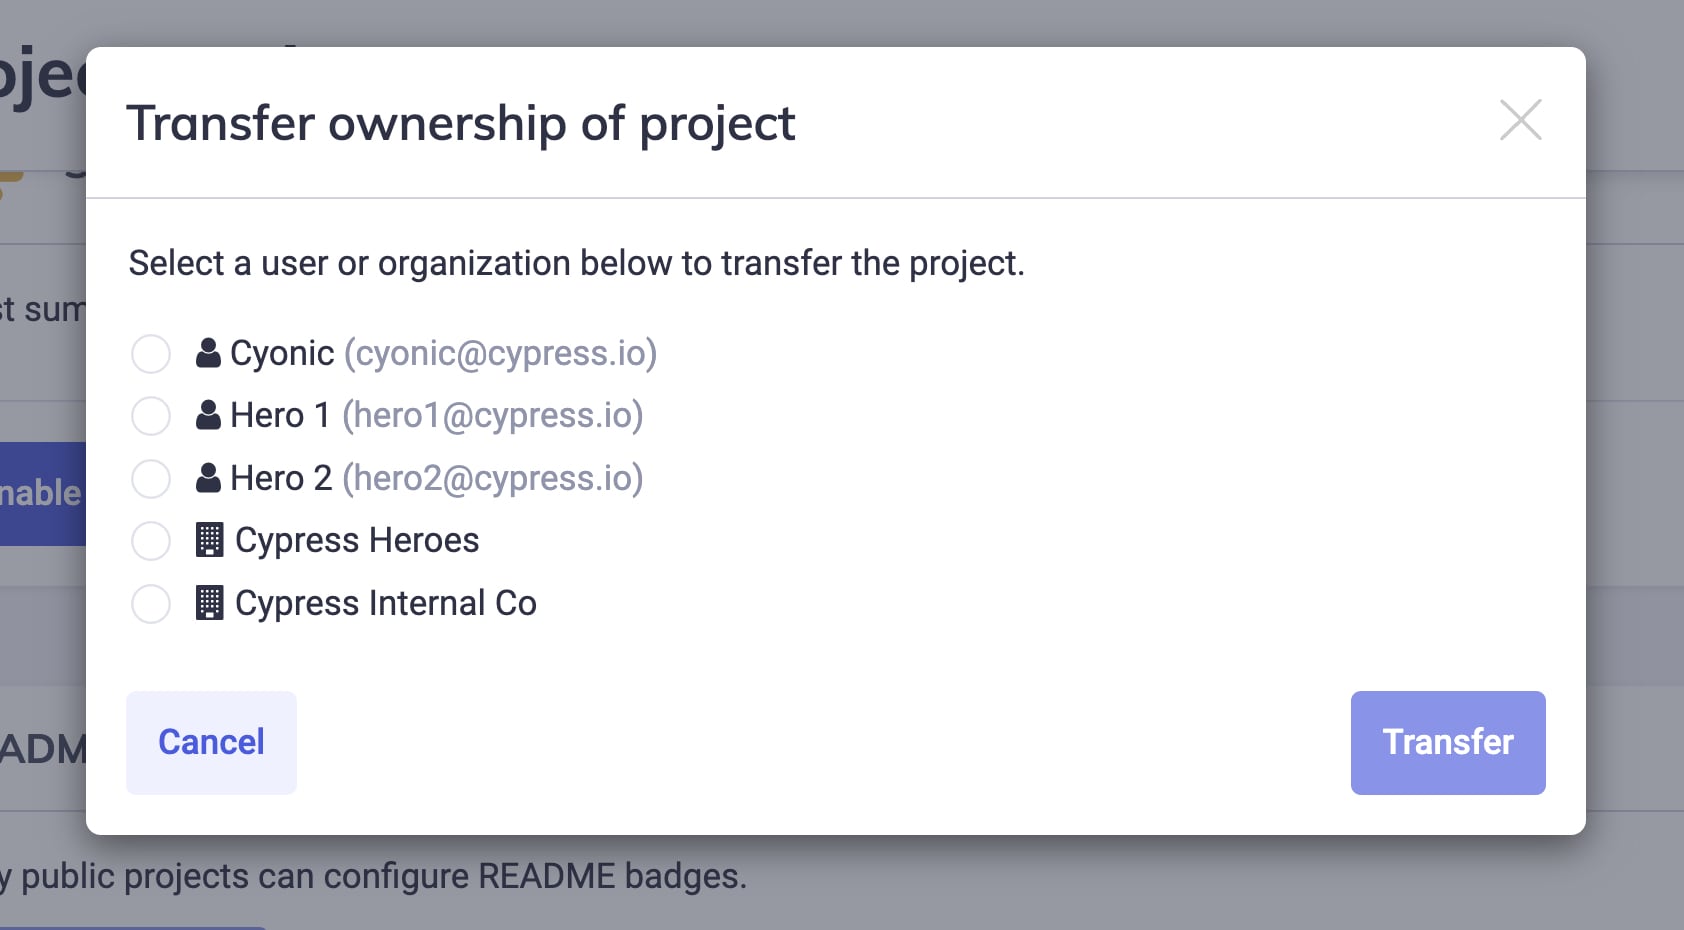 Transfer Project dialog